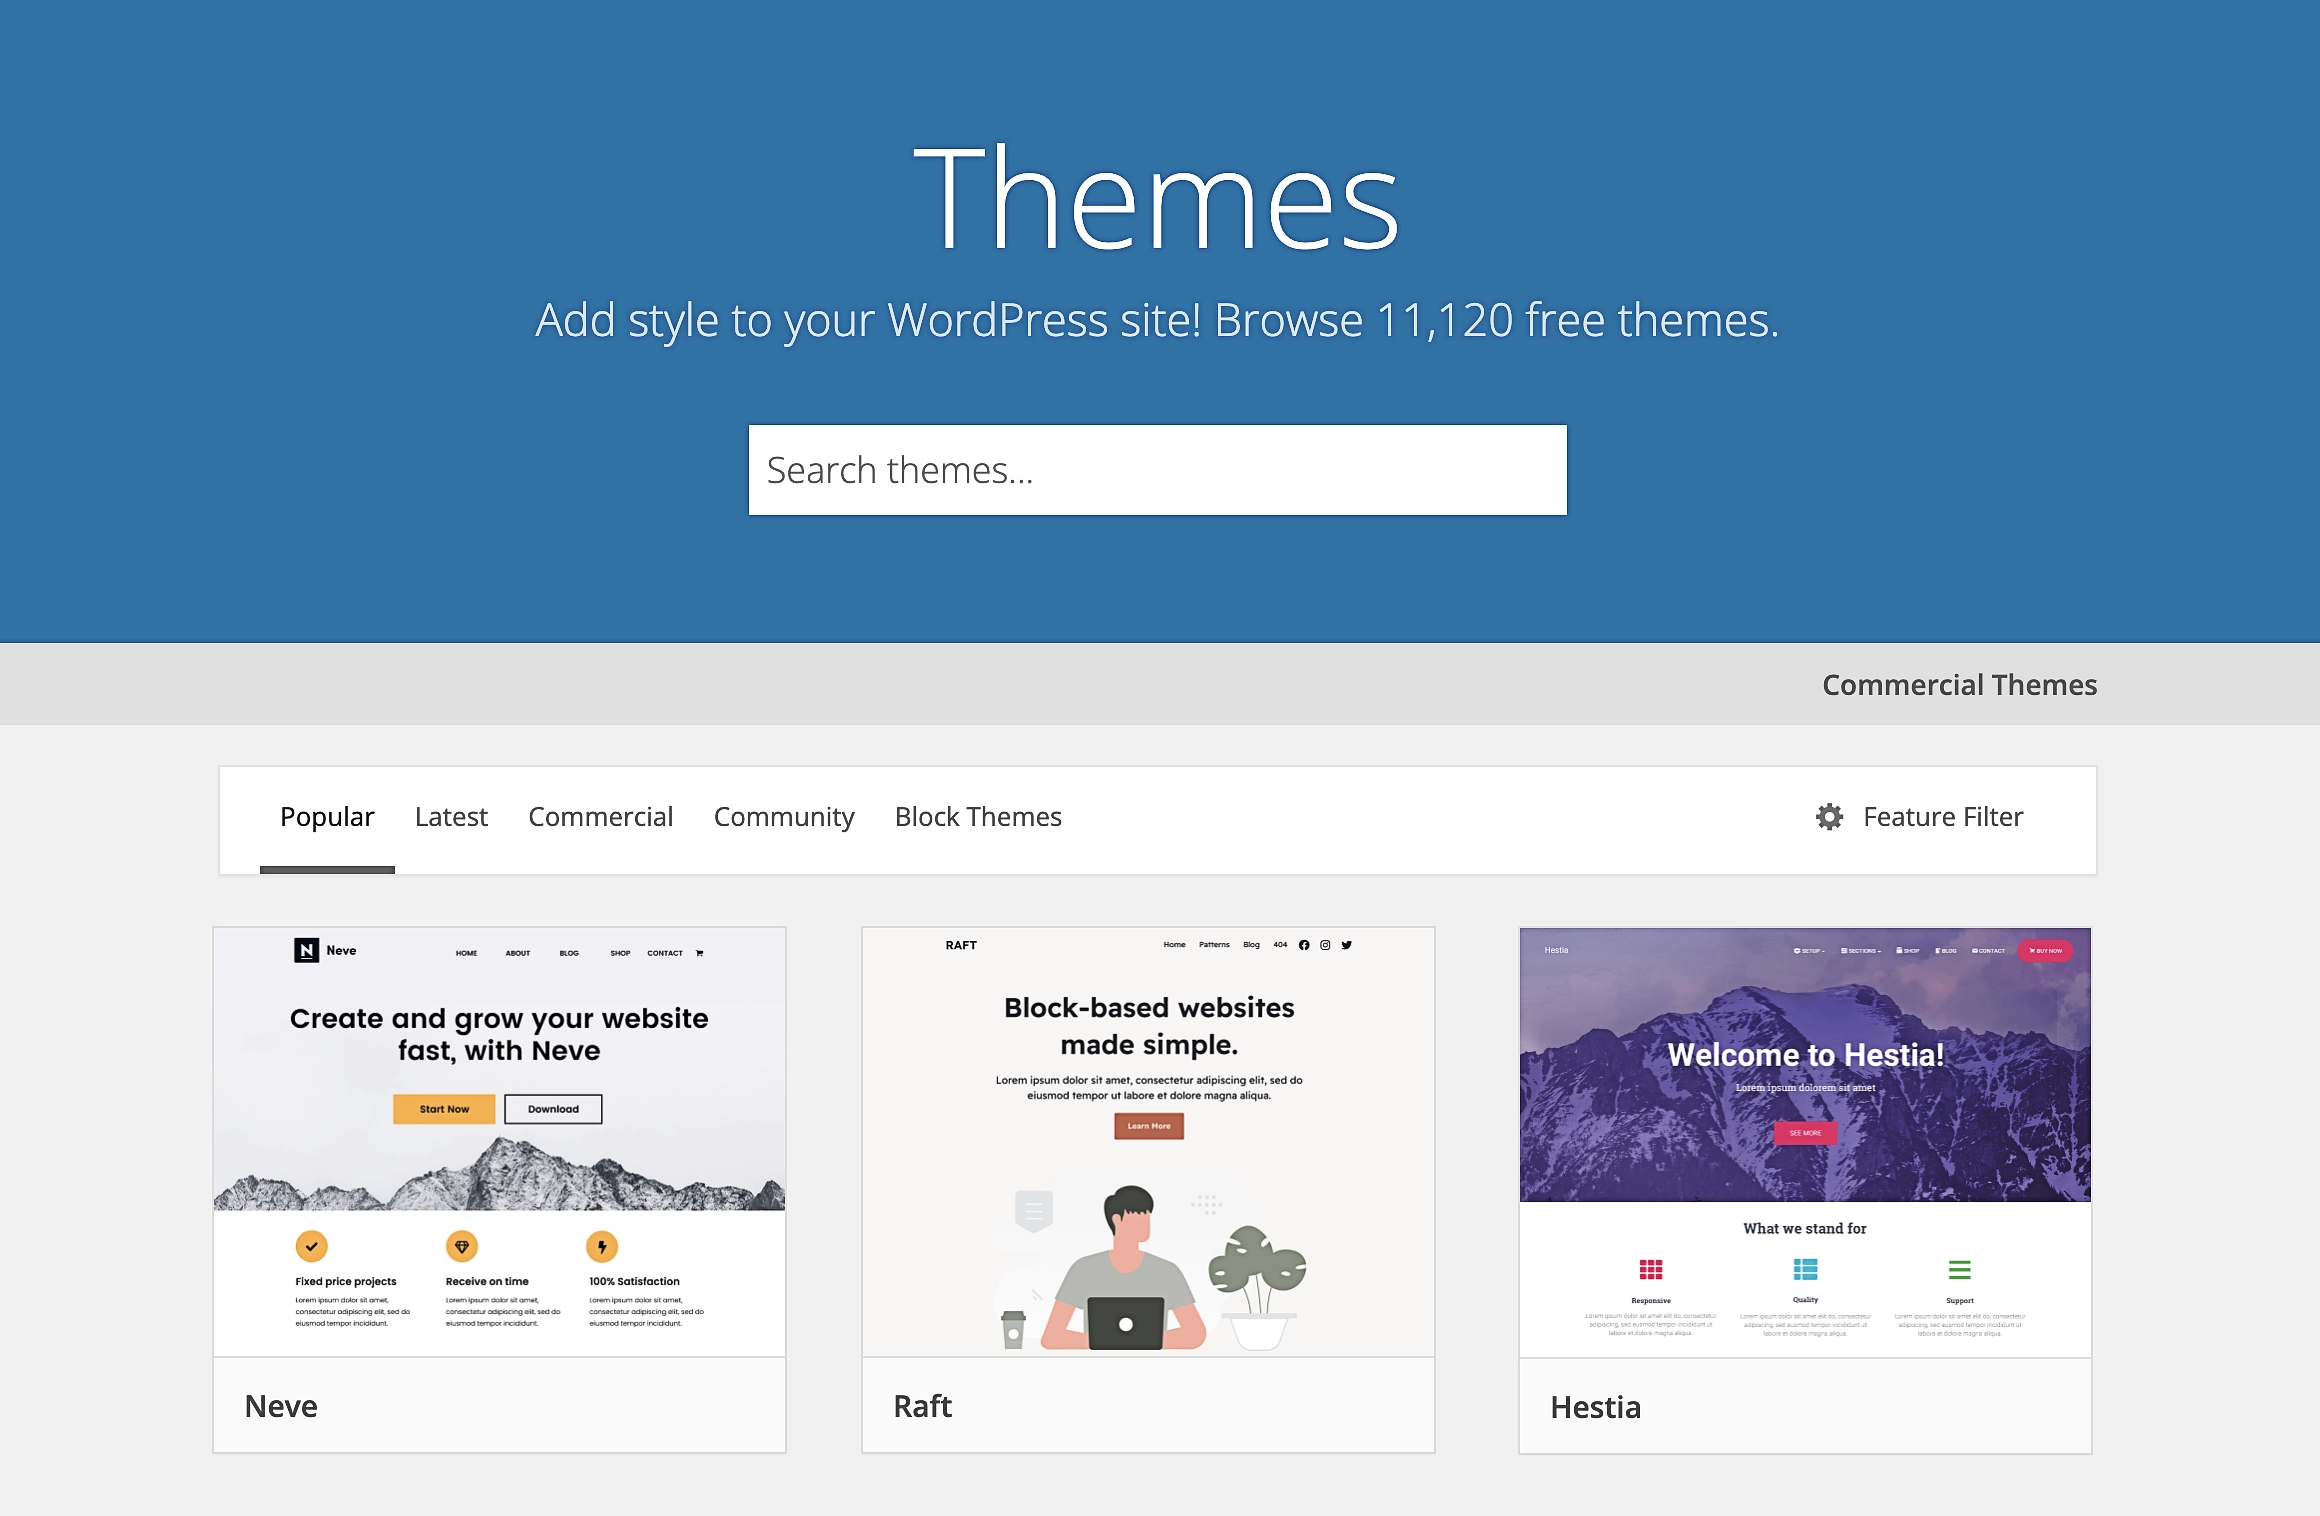 The official WordPress theme repository.